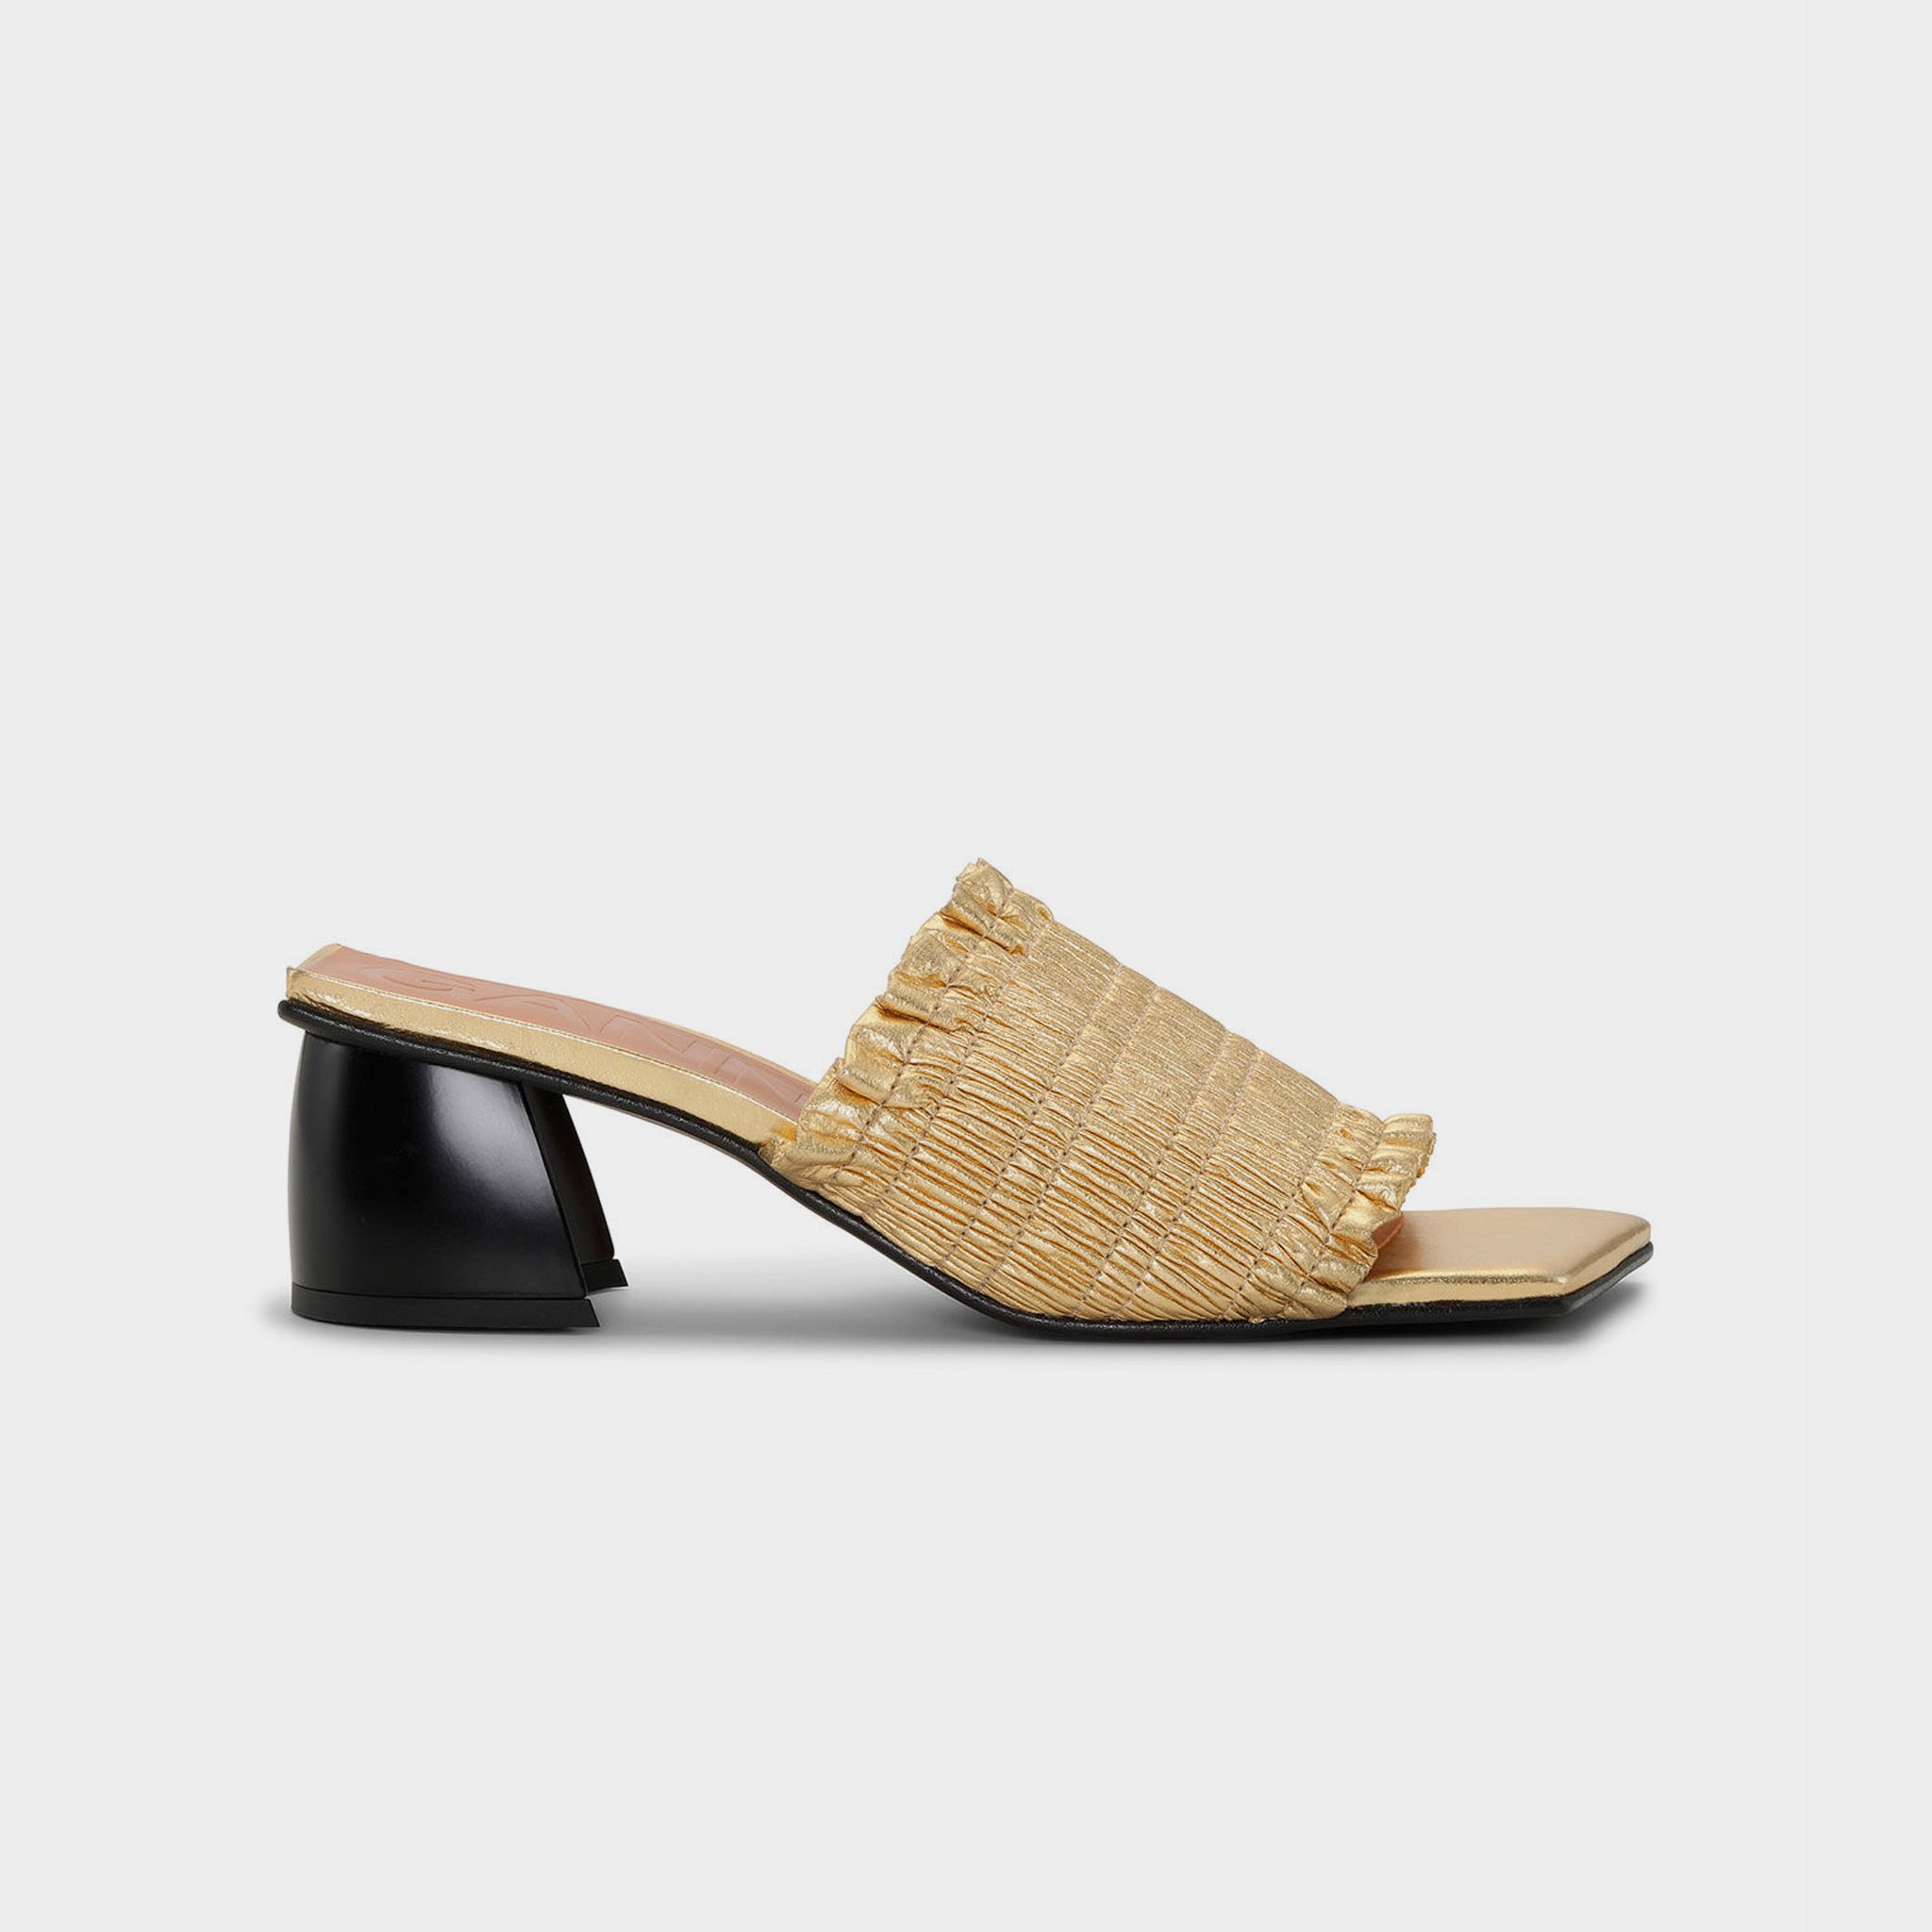 Gold heeled slide with black block heel, square toe, and gold upper, with smocked gold vamp - side view.